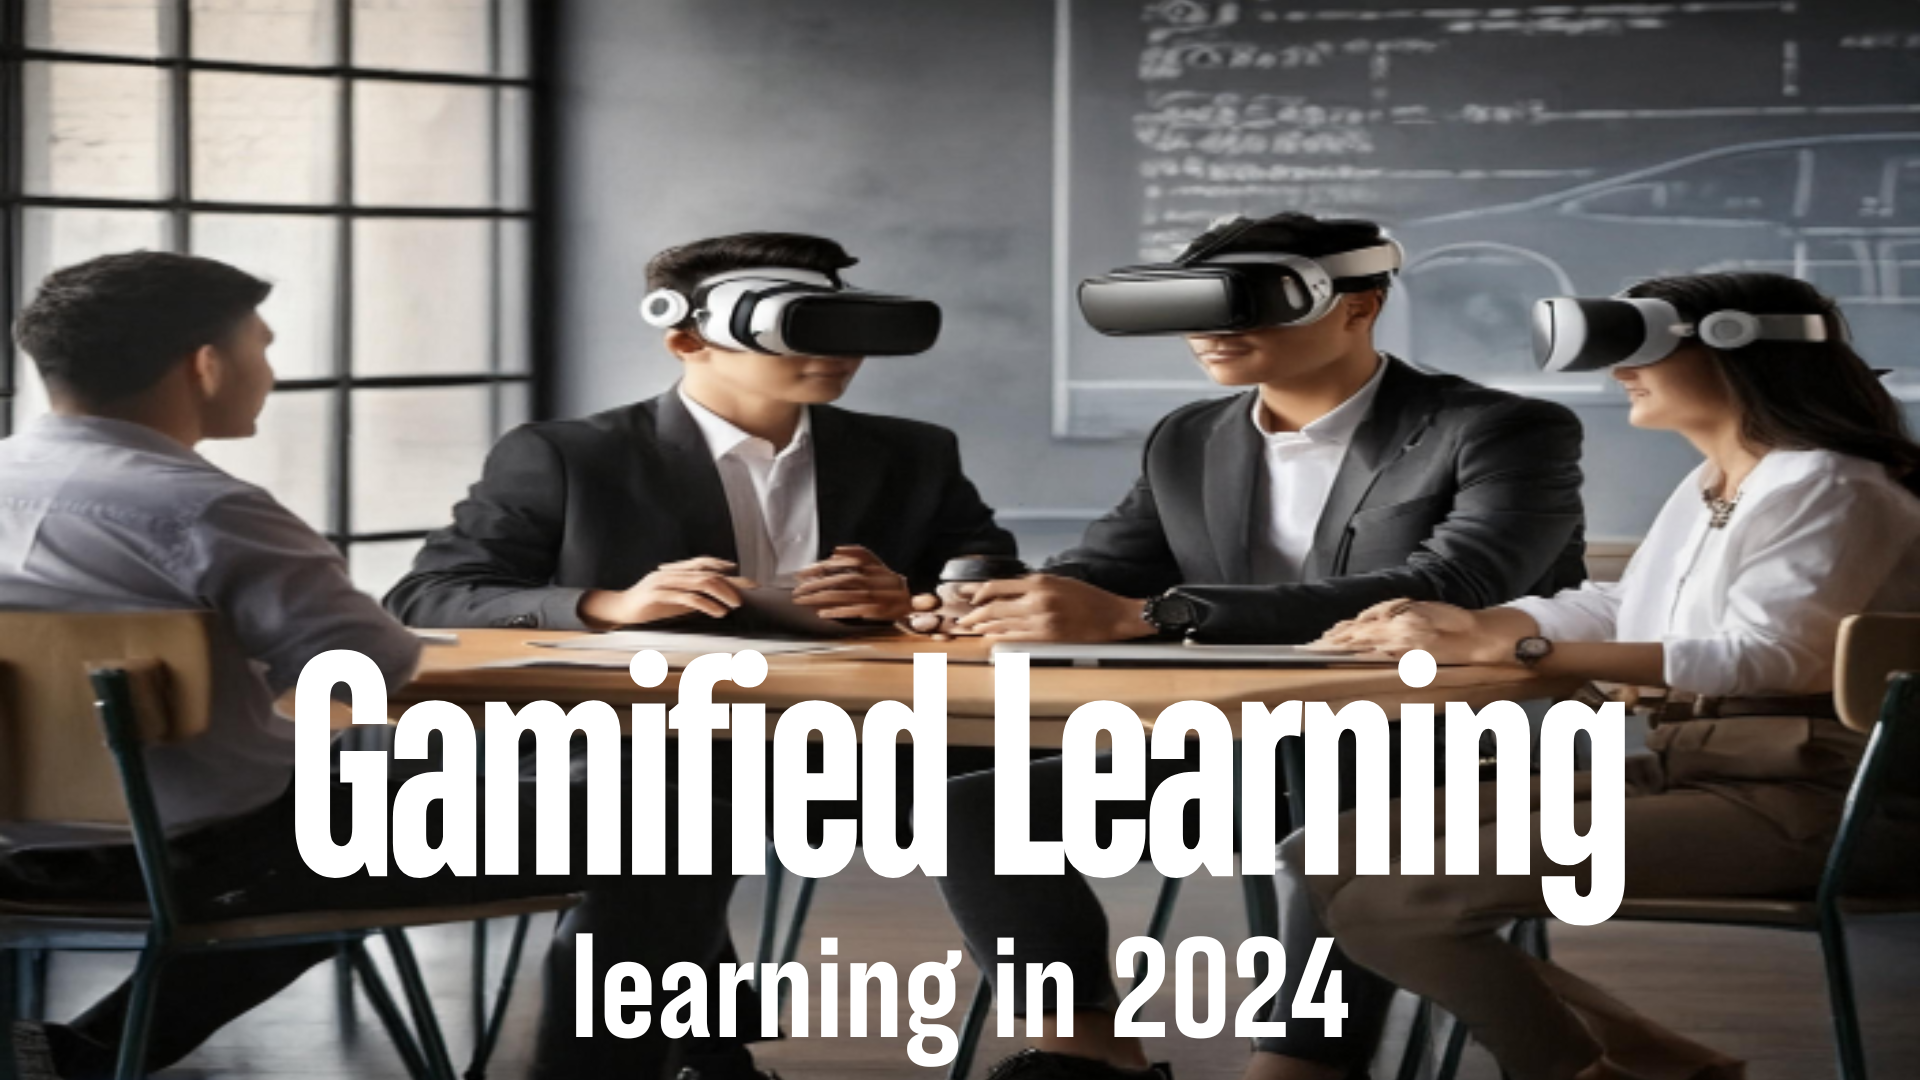 Discover how gamified learning transforms education in 2024 with VR, AR, and mobile apps, enhancing student engagement and personalized learning.